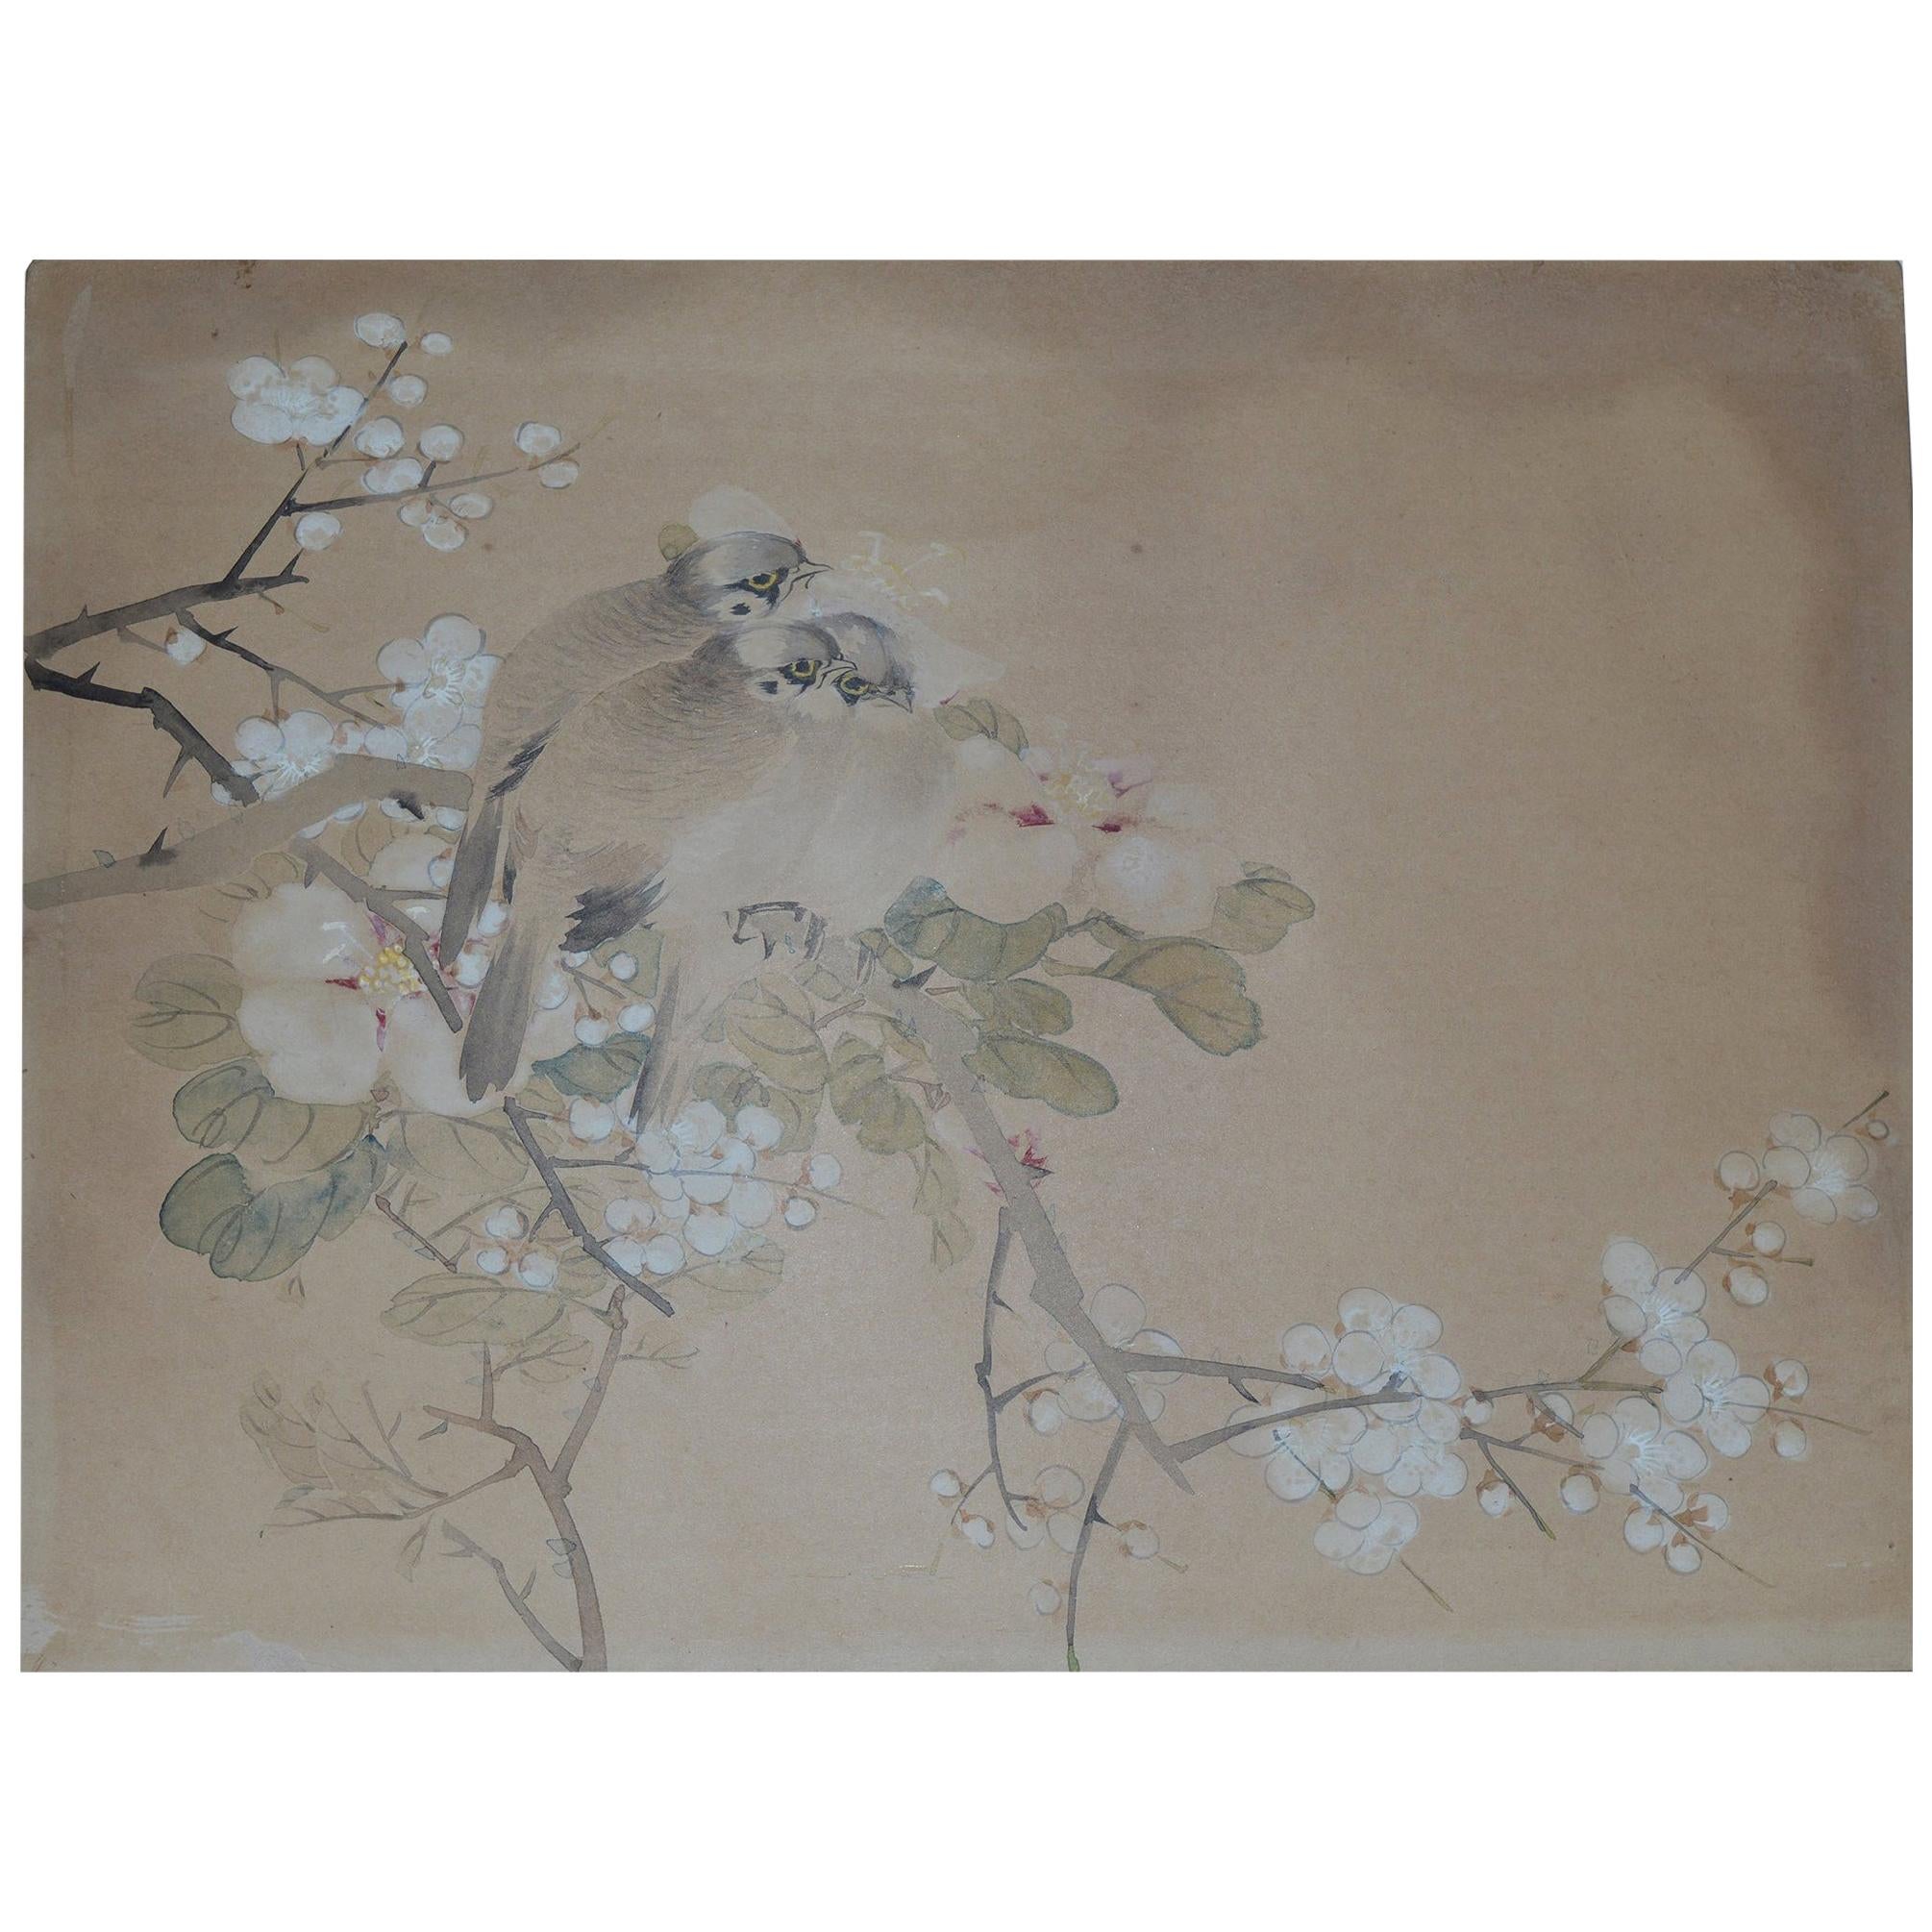 Antique Chinoiserie Watercolor Panel of Birds, 19th Century